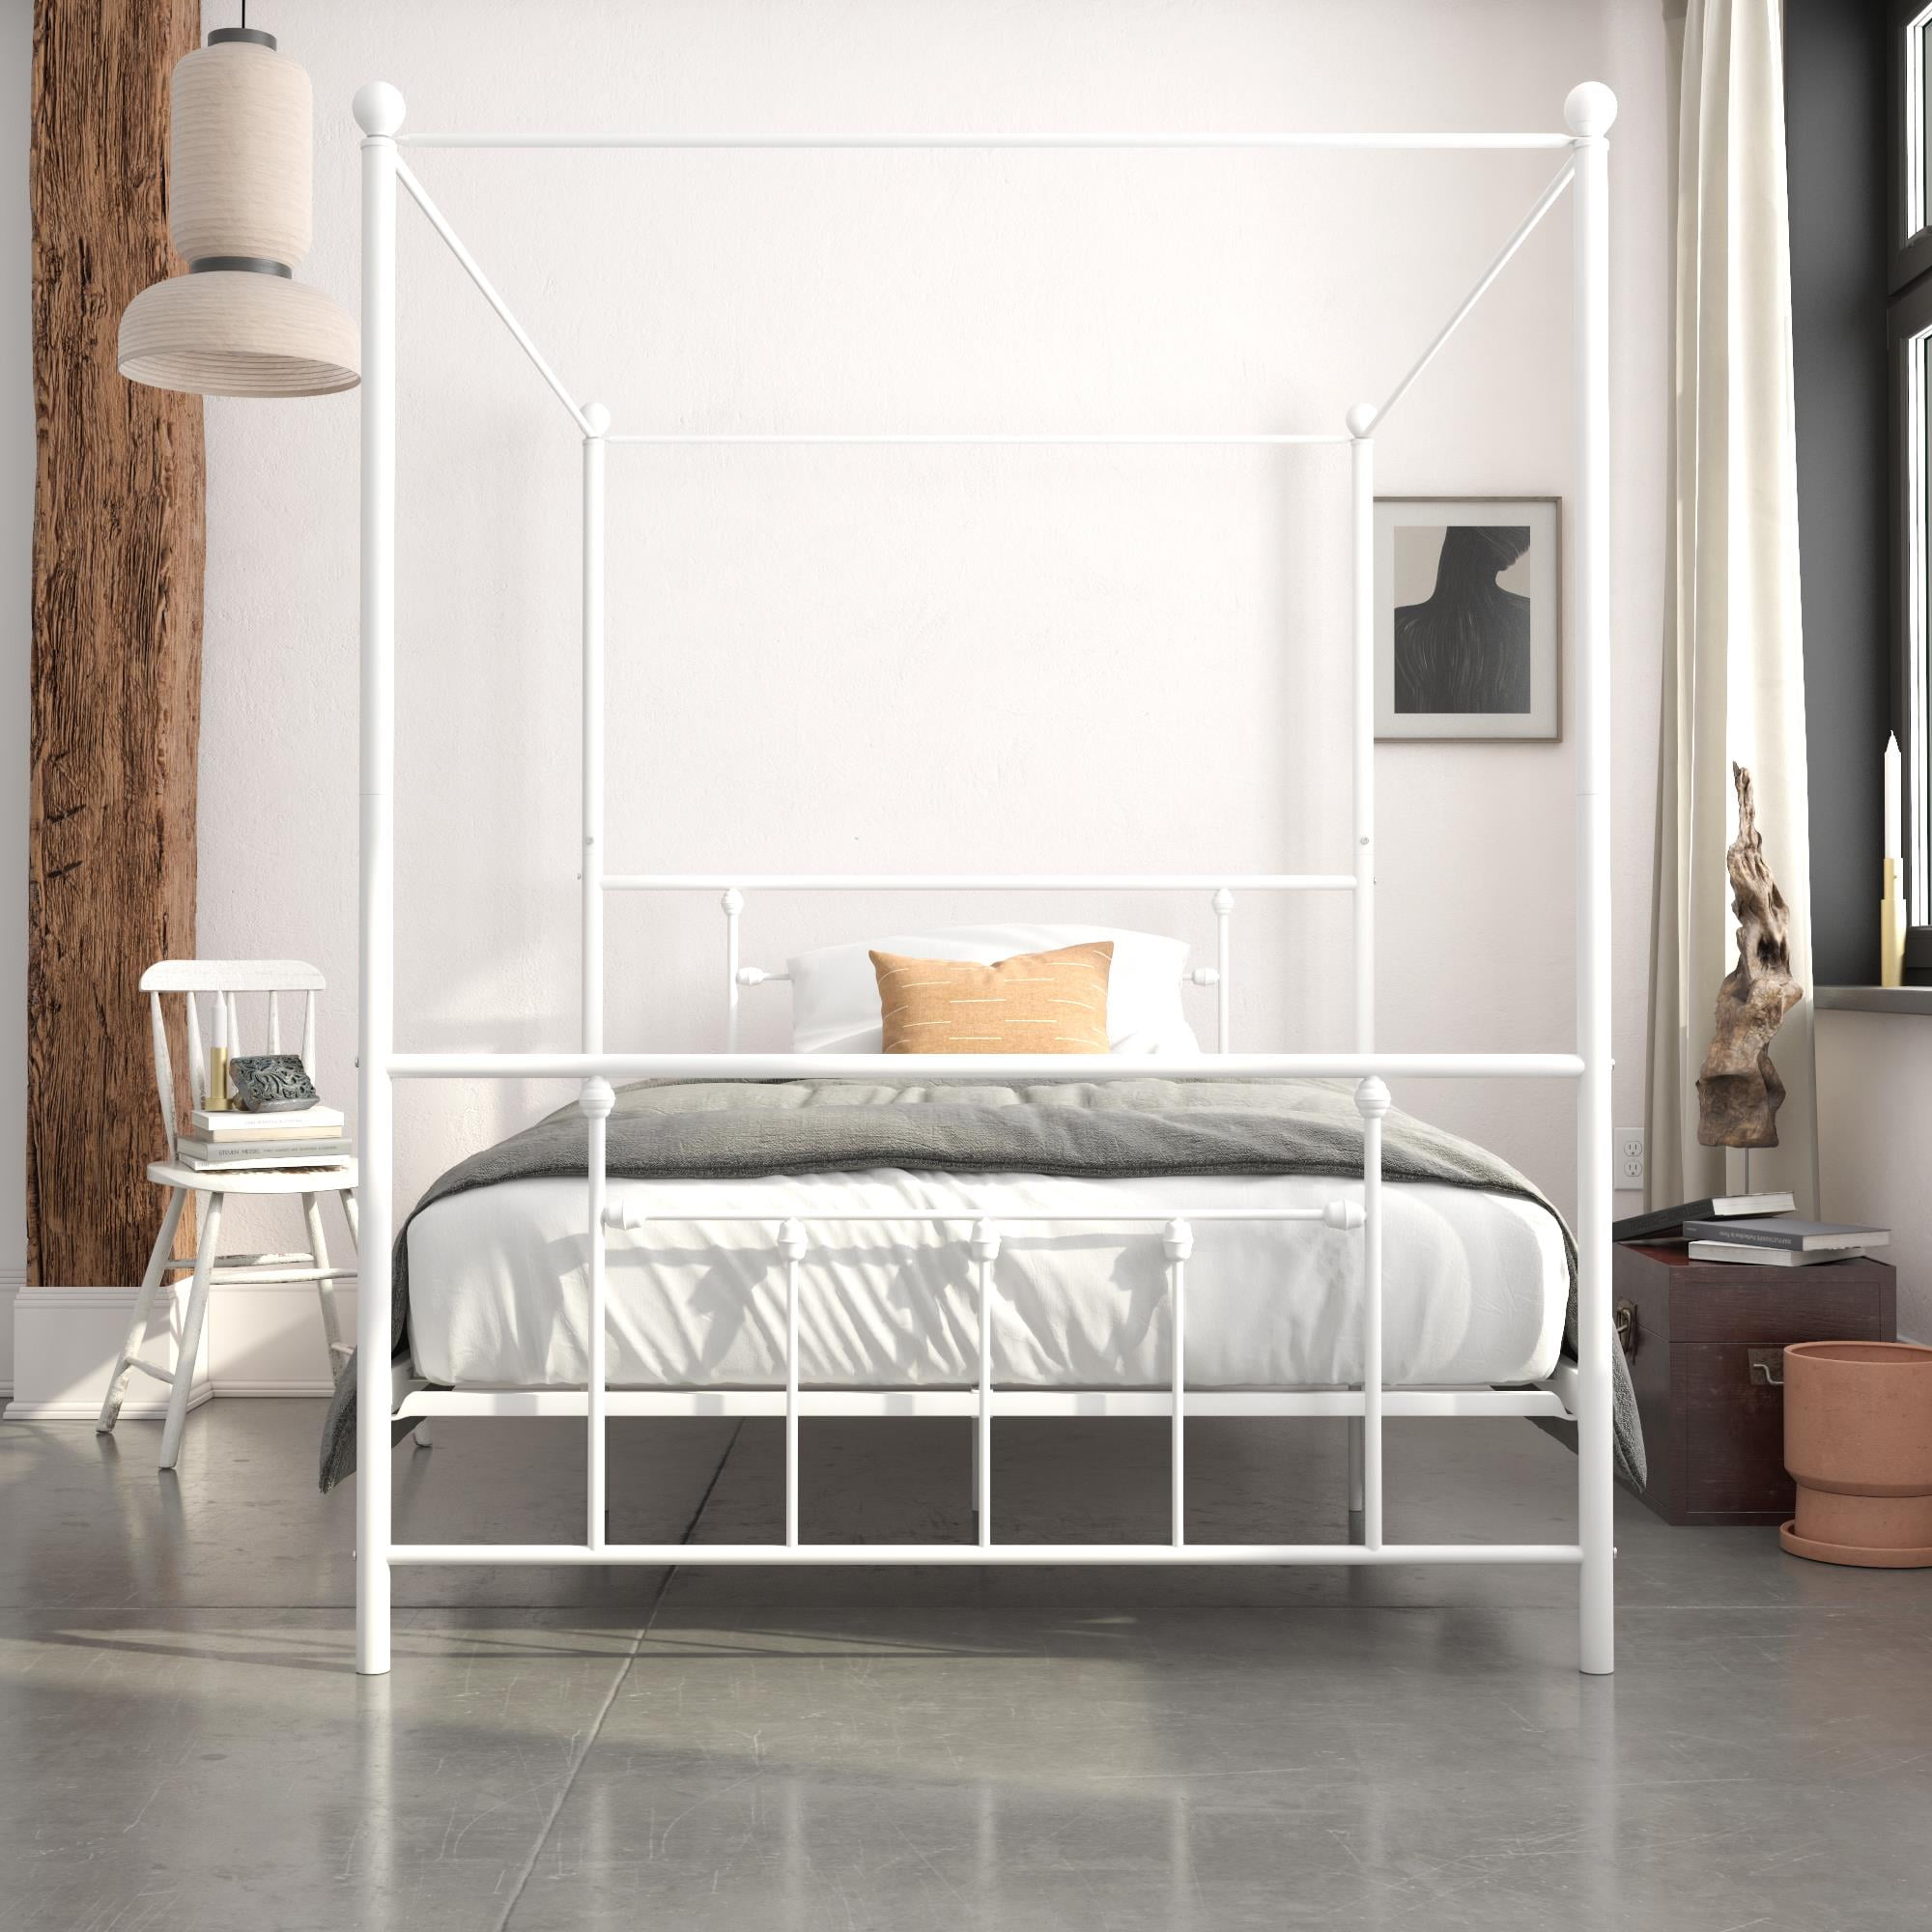 Novogratz Stylish and classy design Marion Canopy Bed Frame Weight limit 450lb+ 